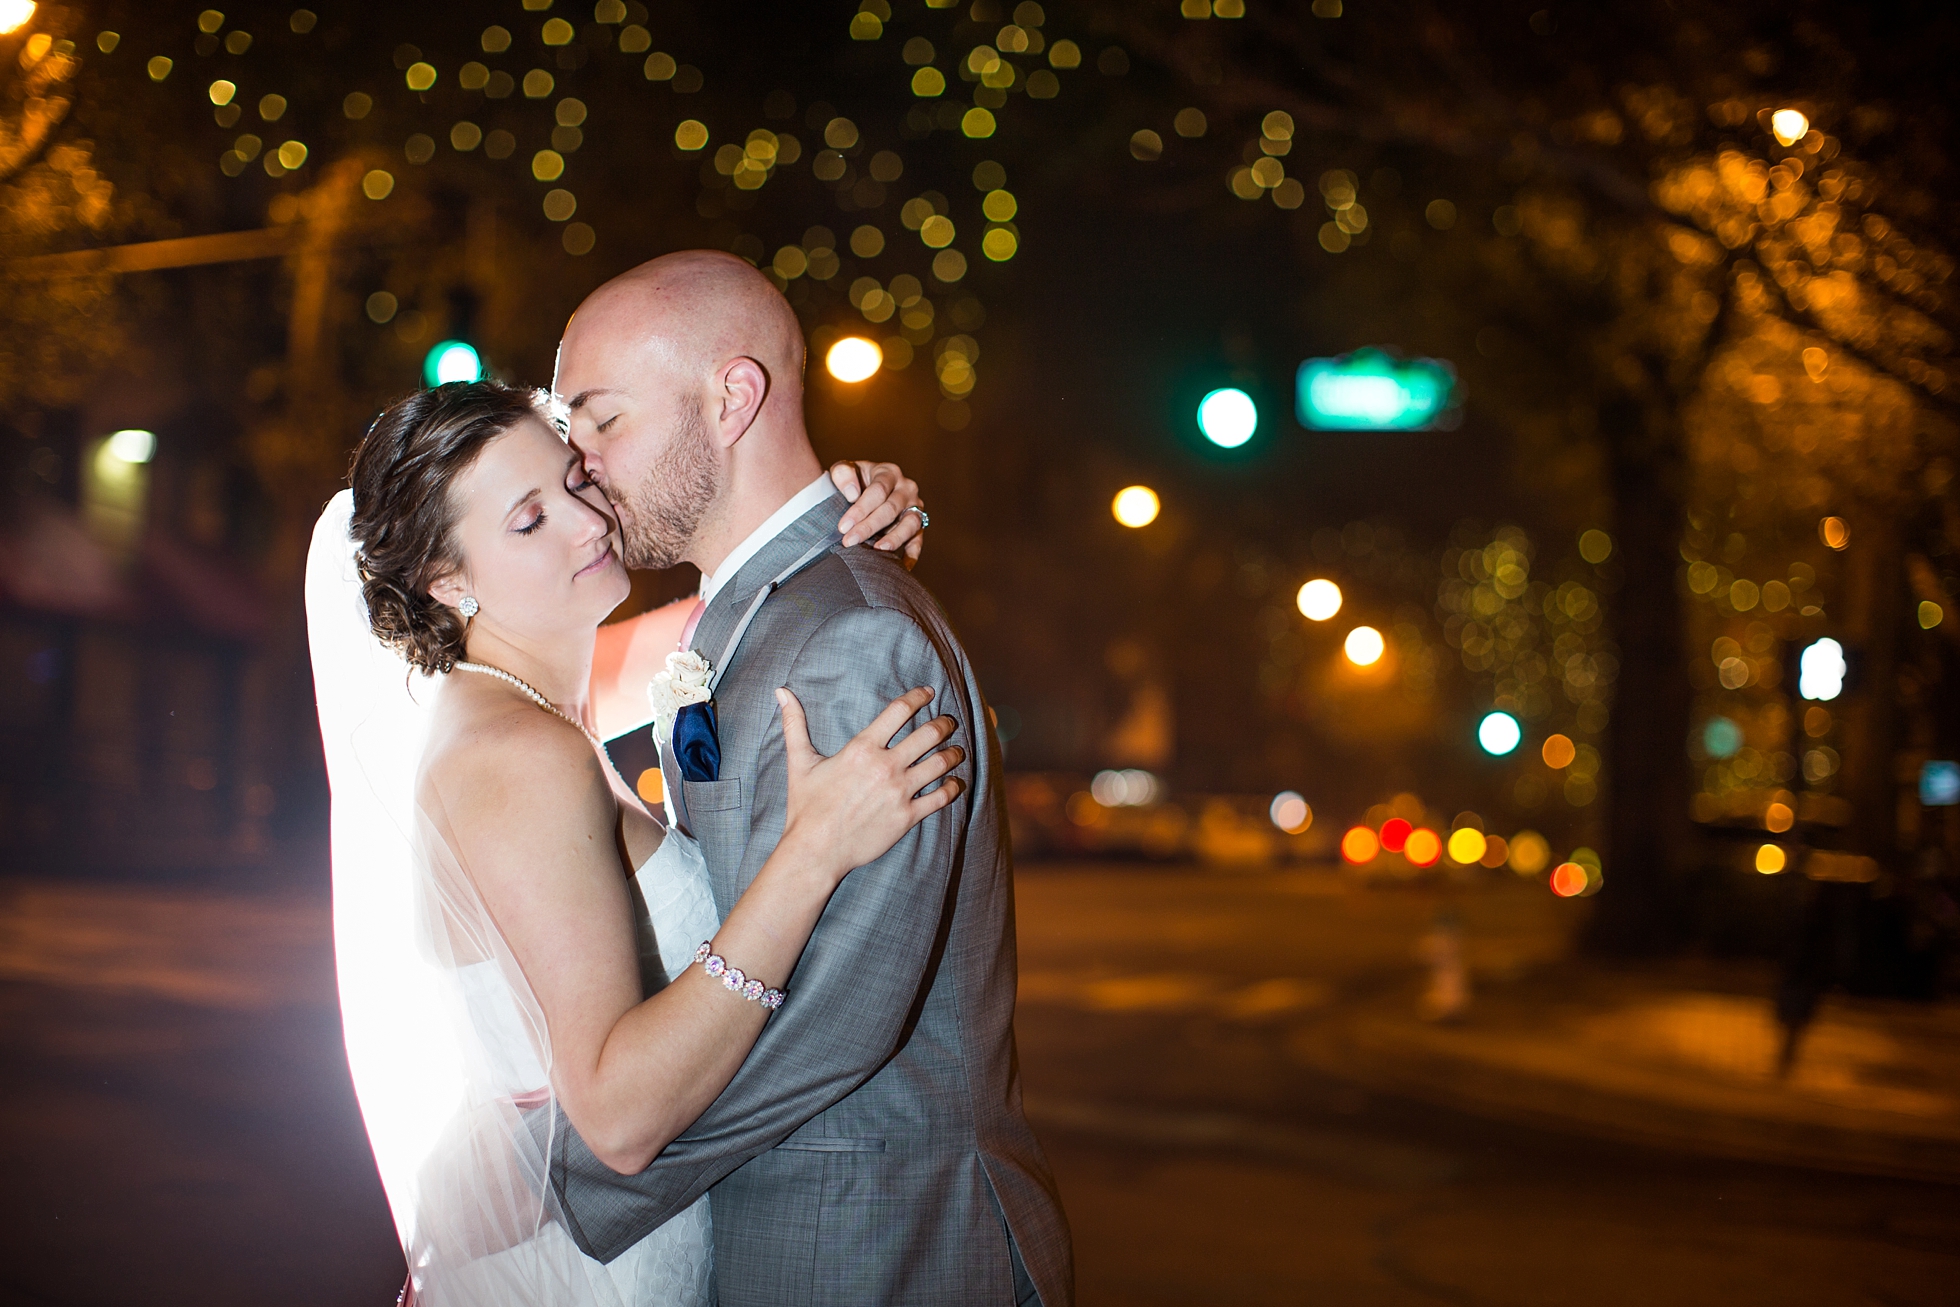 downtown athens nighttime wedding photography